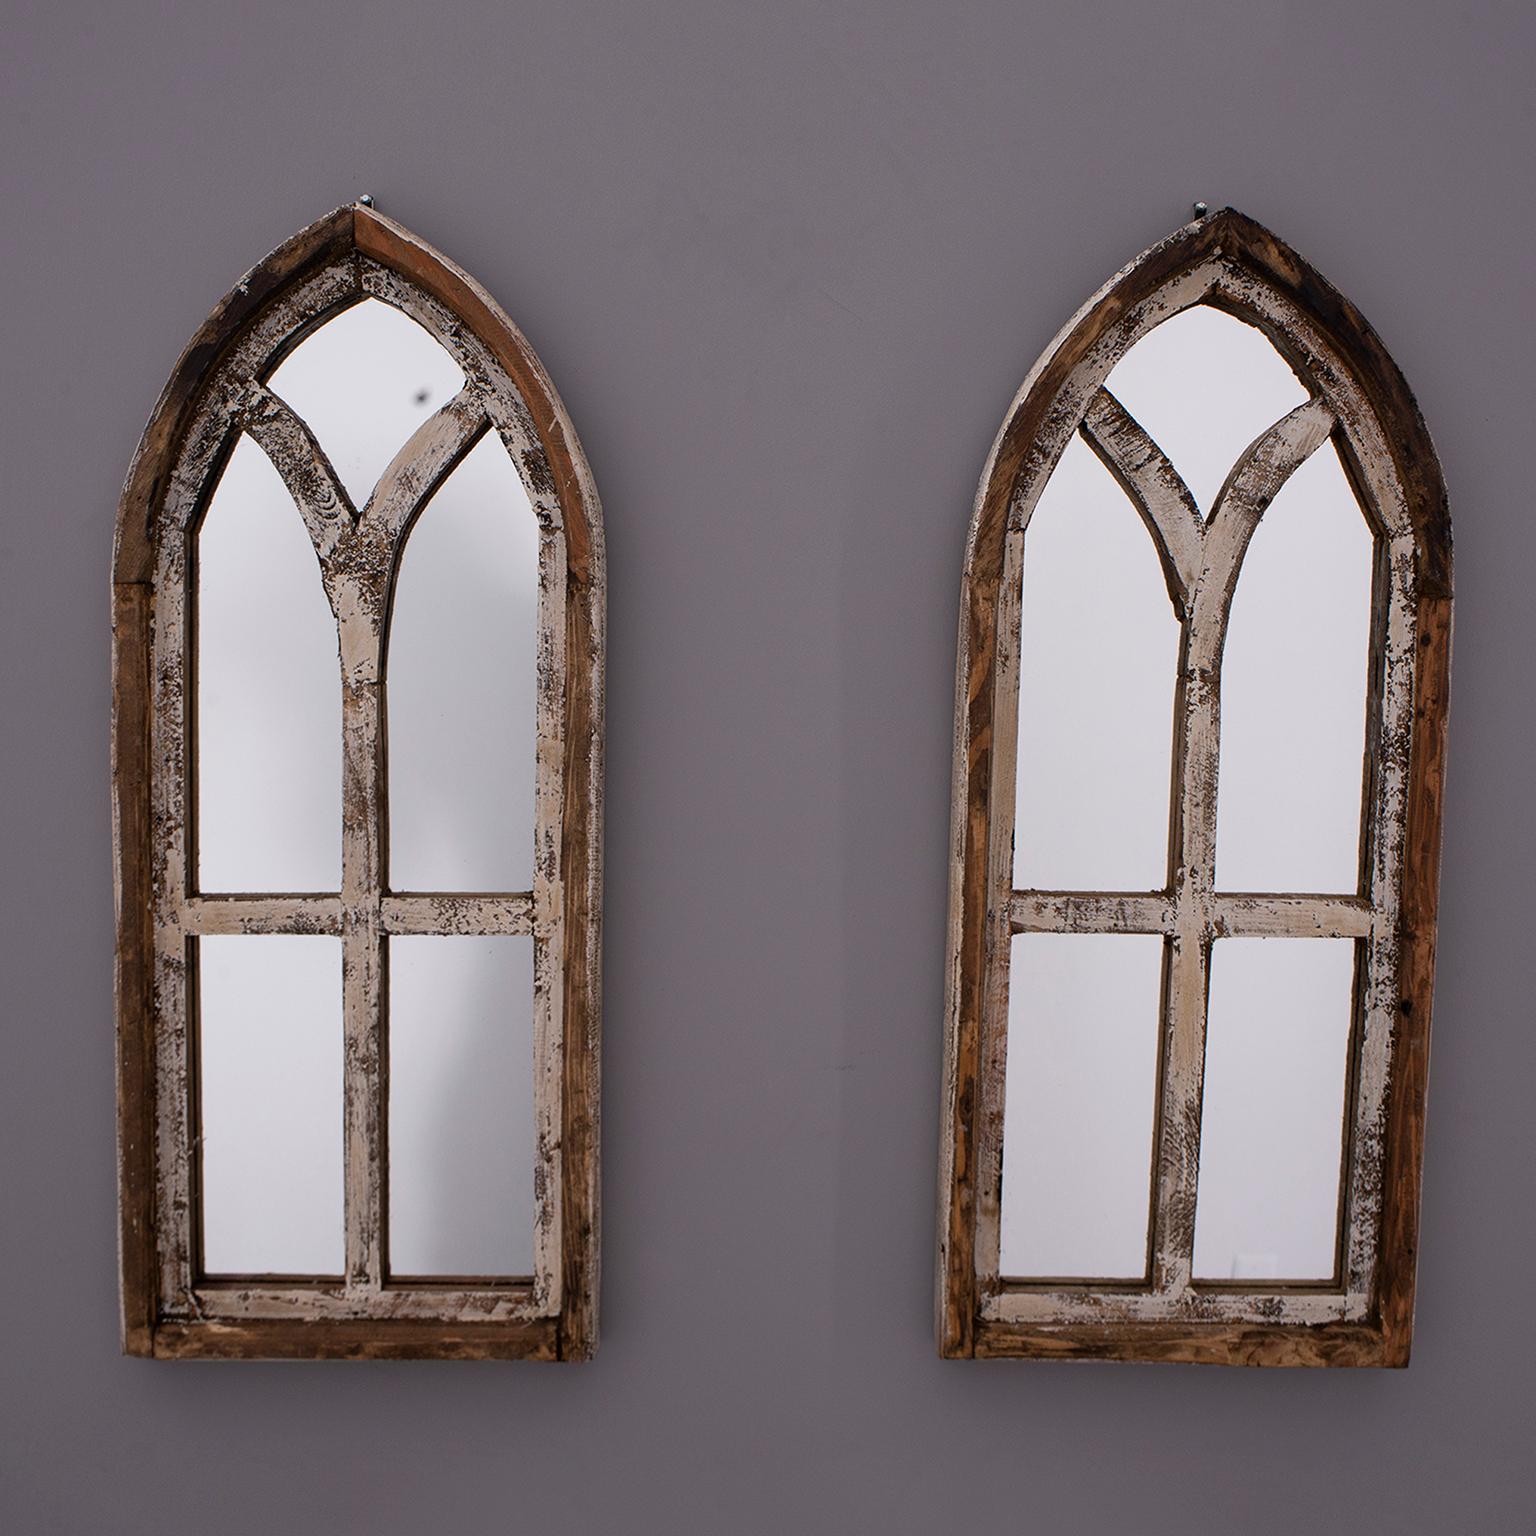 Pair small arched wooden window frames with original distressed creamy white paint. We had mirrors custom cut and glued into frames. Unknown origin and age. Sold and priced as a pair. 